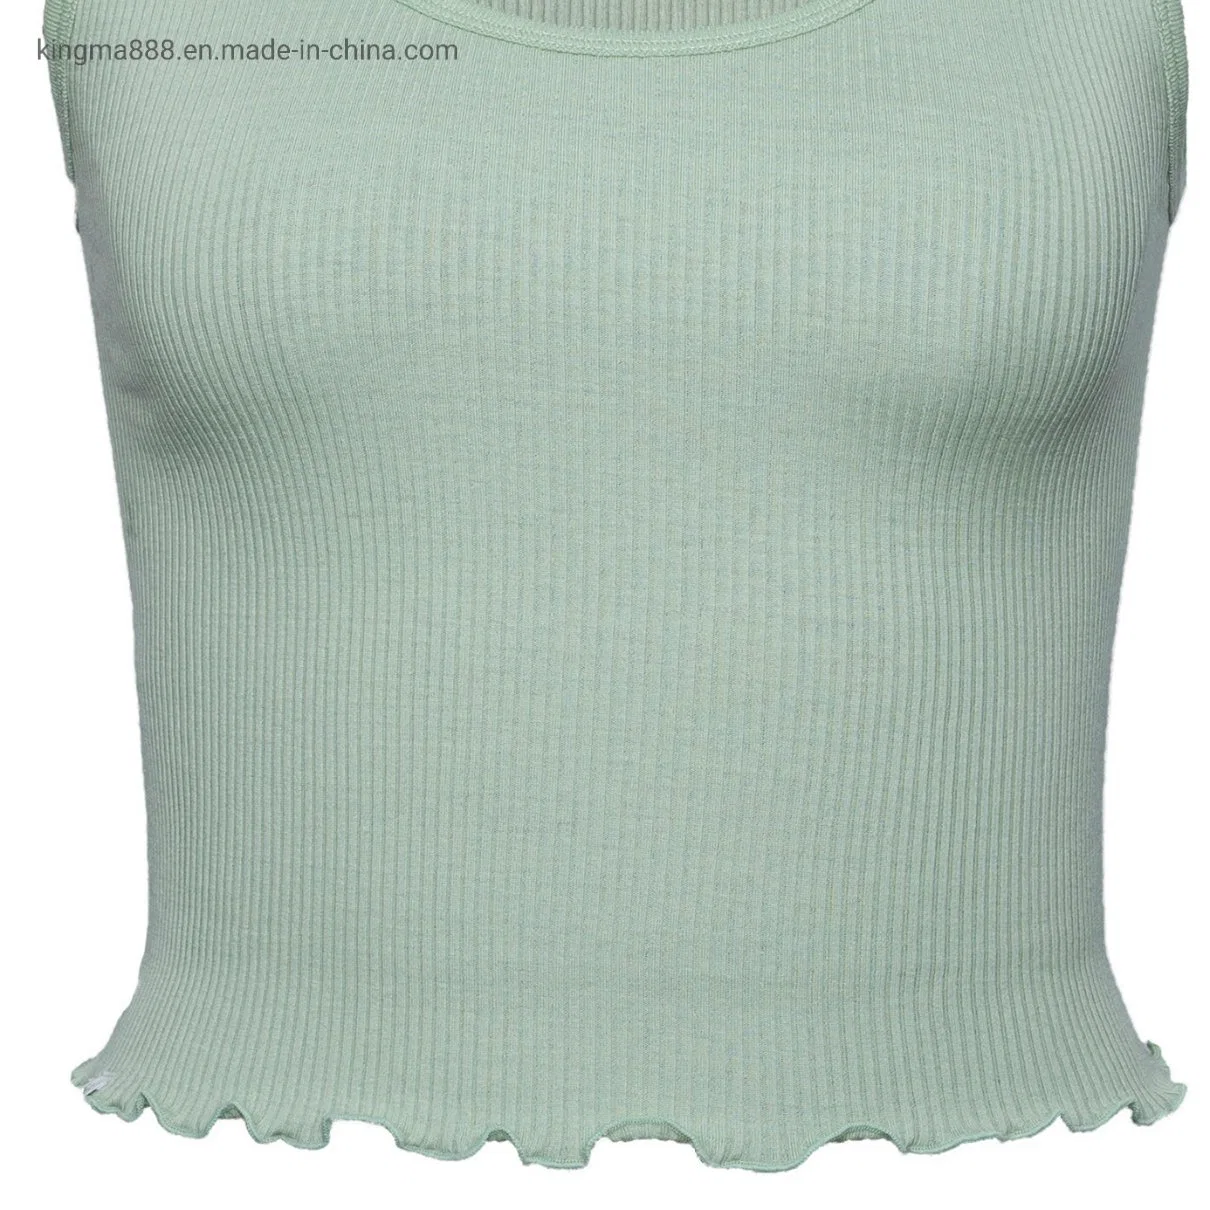 European and American Style Solid Short Sleeveless Women Sexy Top Shirt